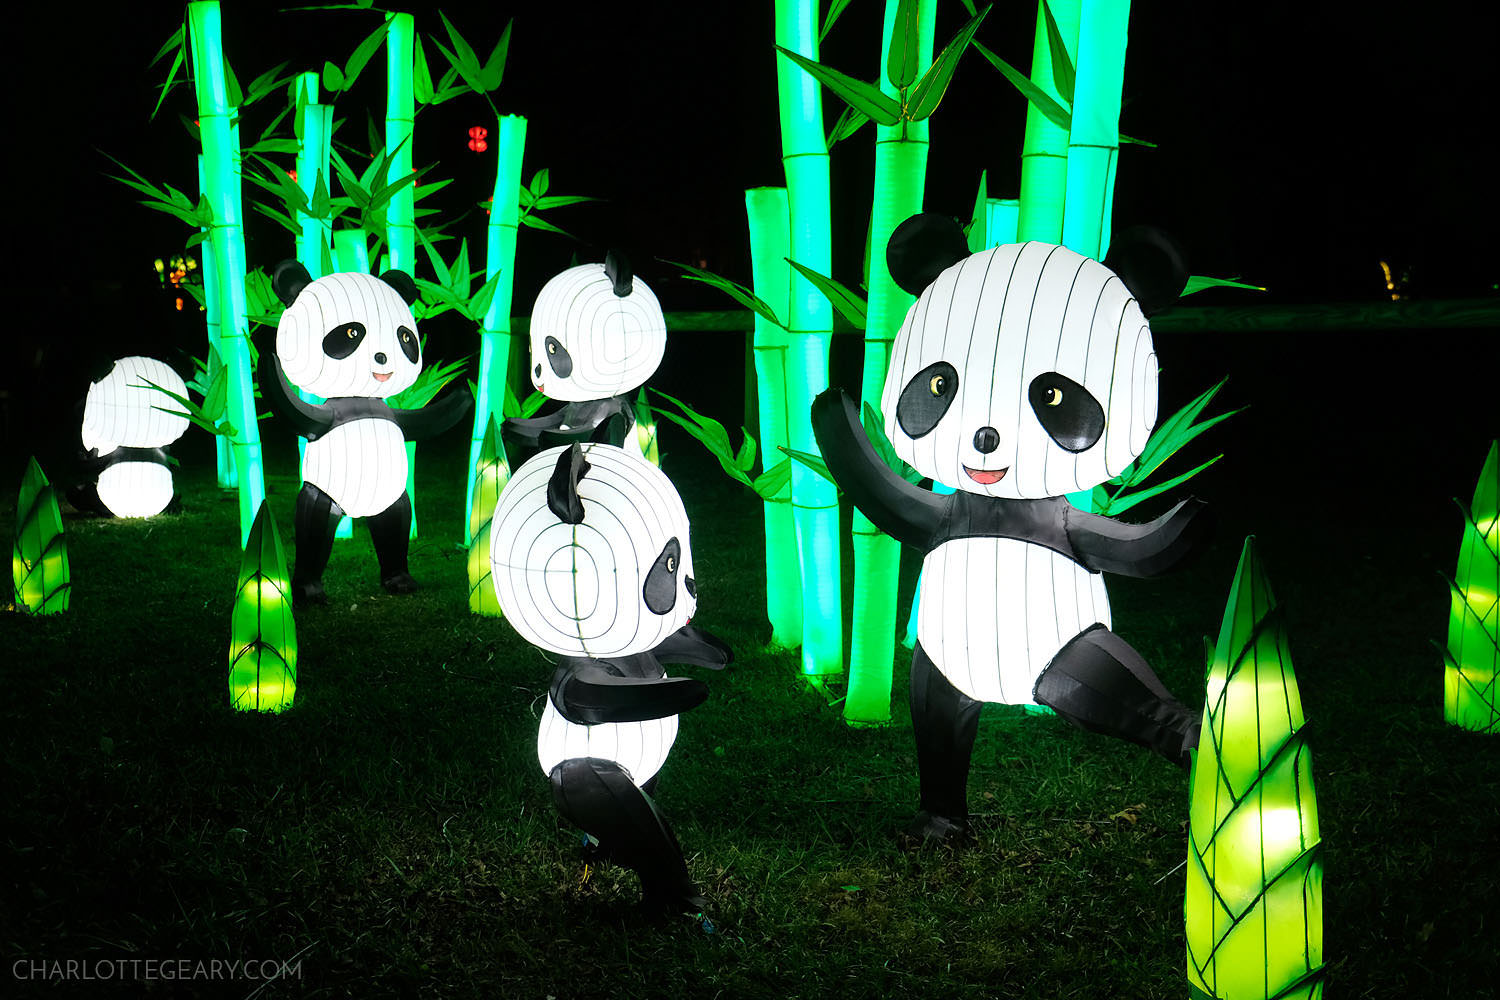 The Chinese Lantern Festival might be the most beautiful holiday lights  show you've ever seen